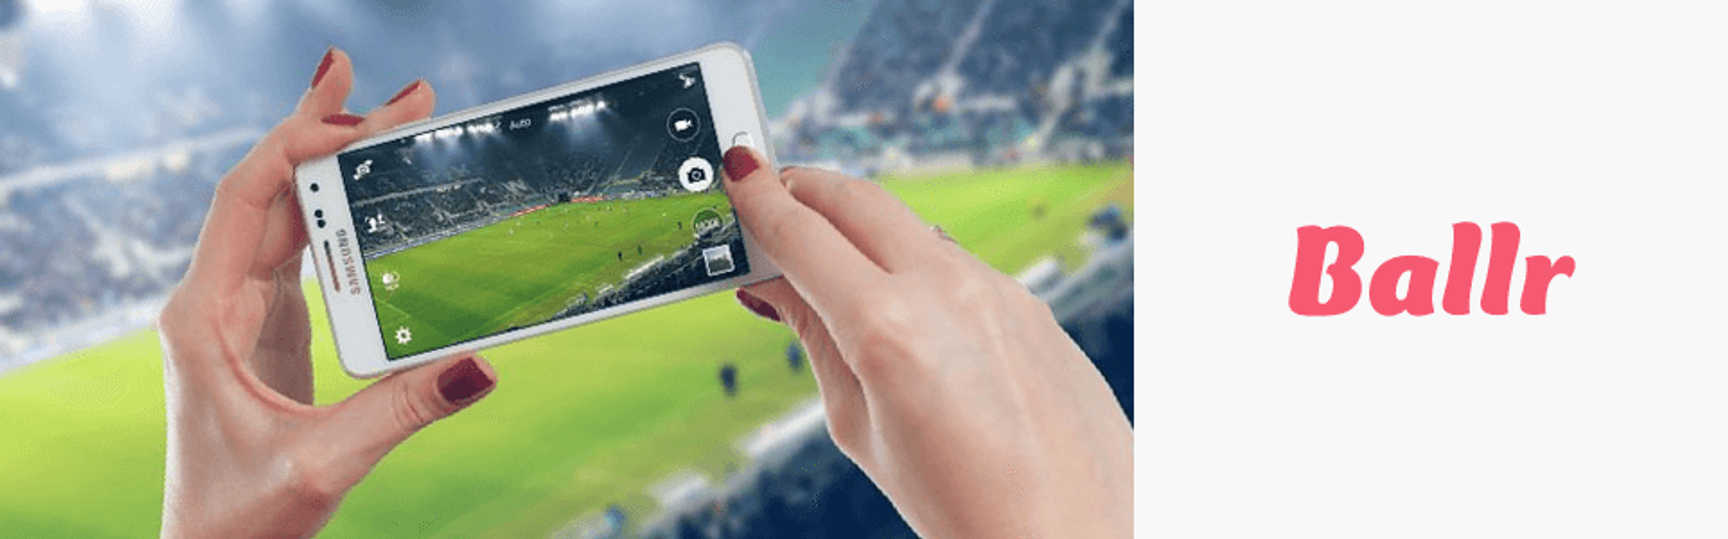 Live Fantasy Sport App Ballr select realtime technology provider Ably in a new era of fan engagement